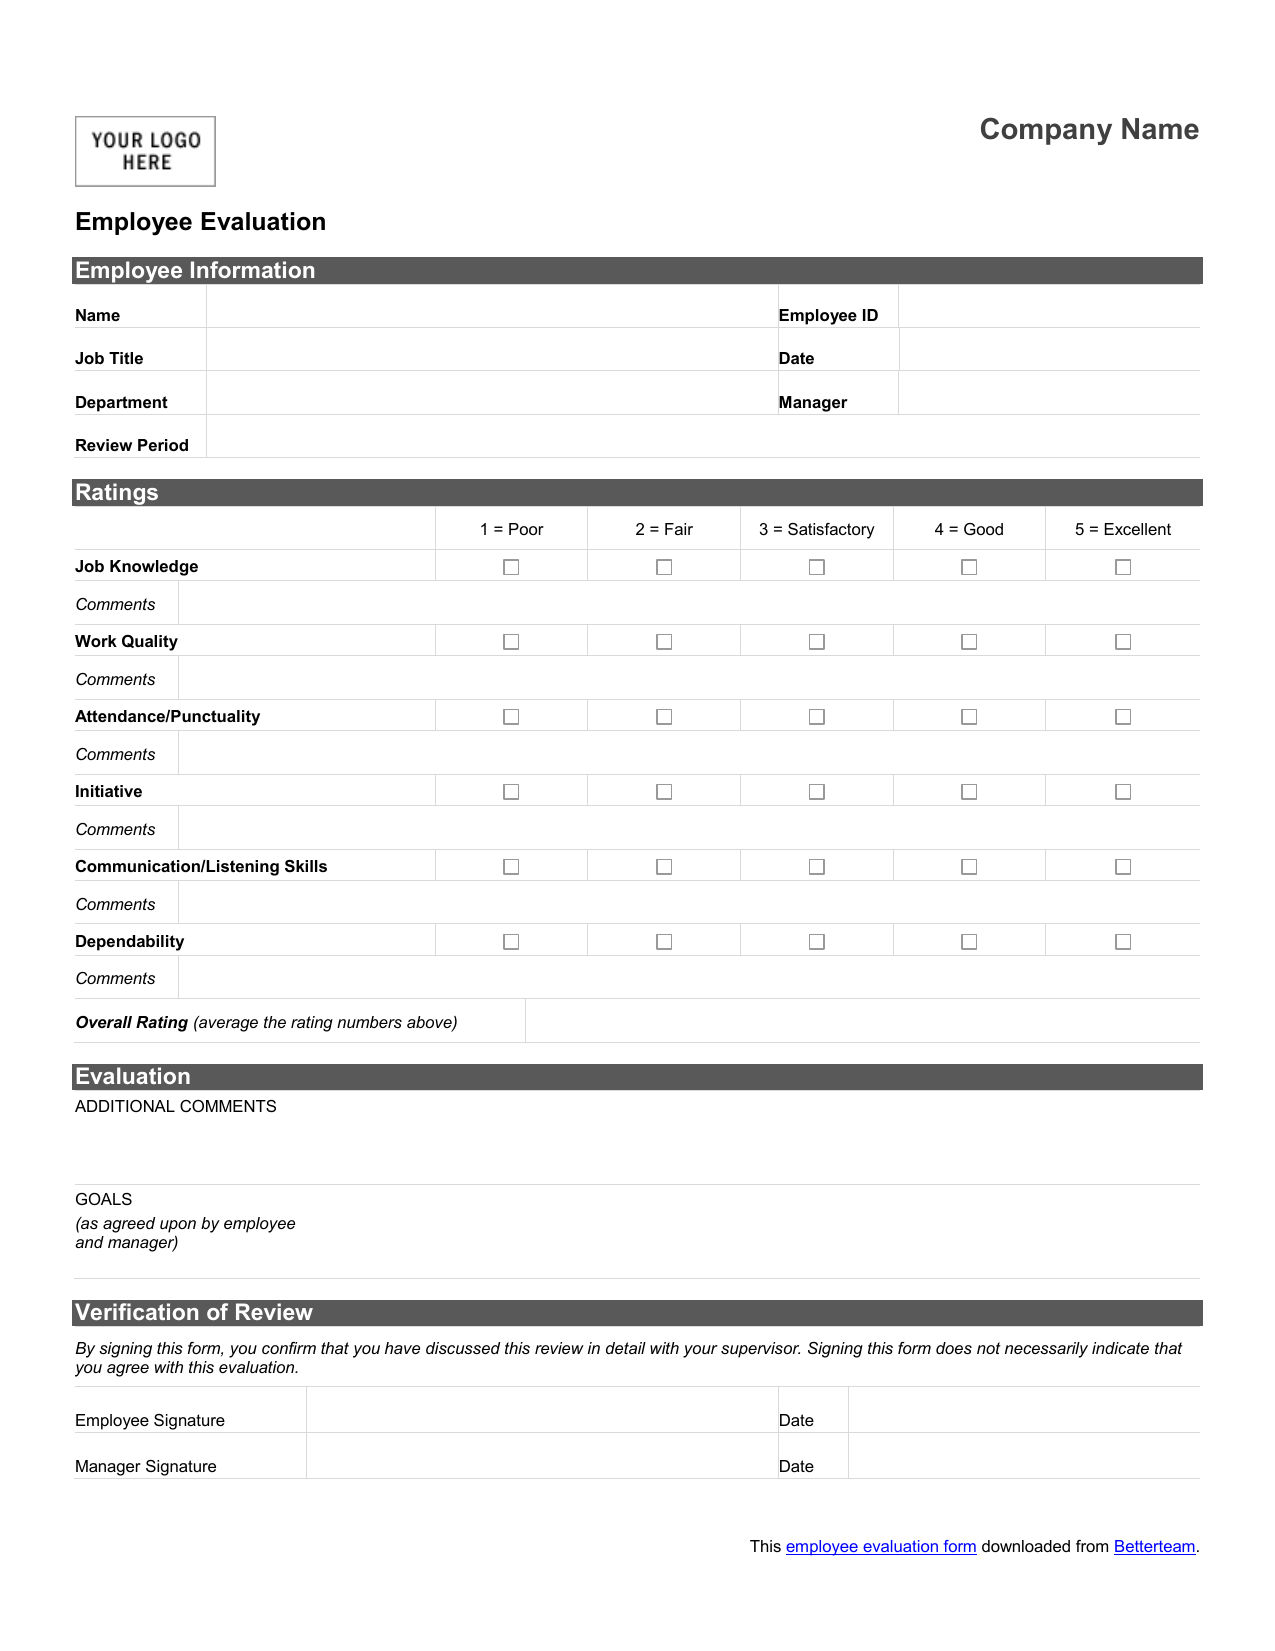 Employee evaluation form template word